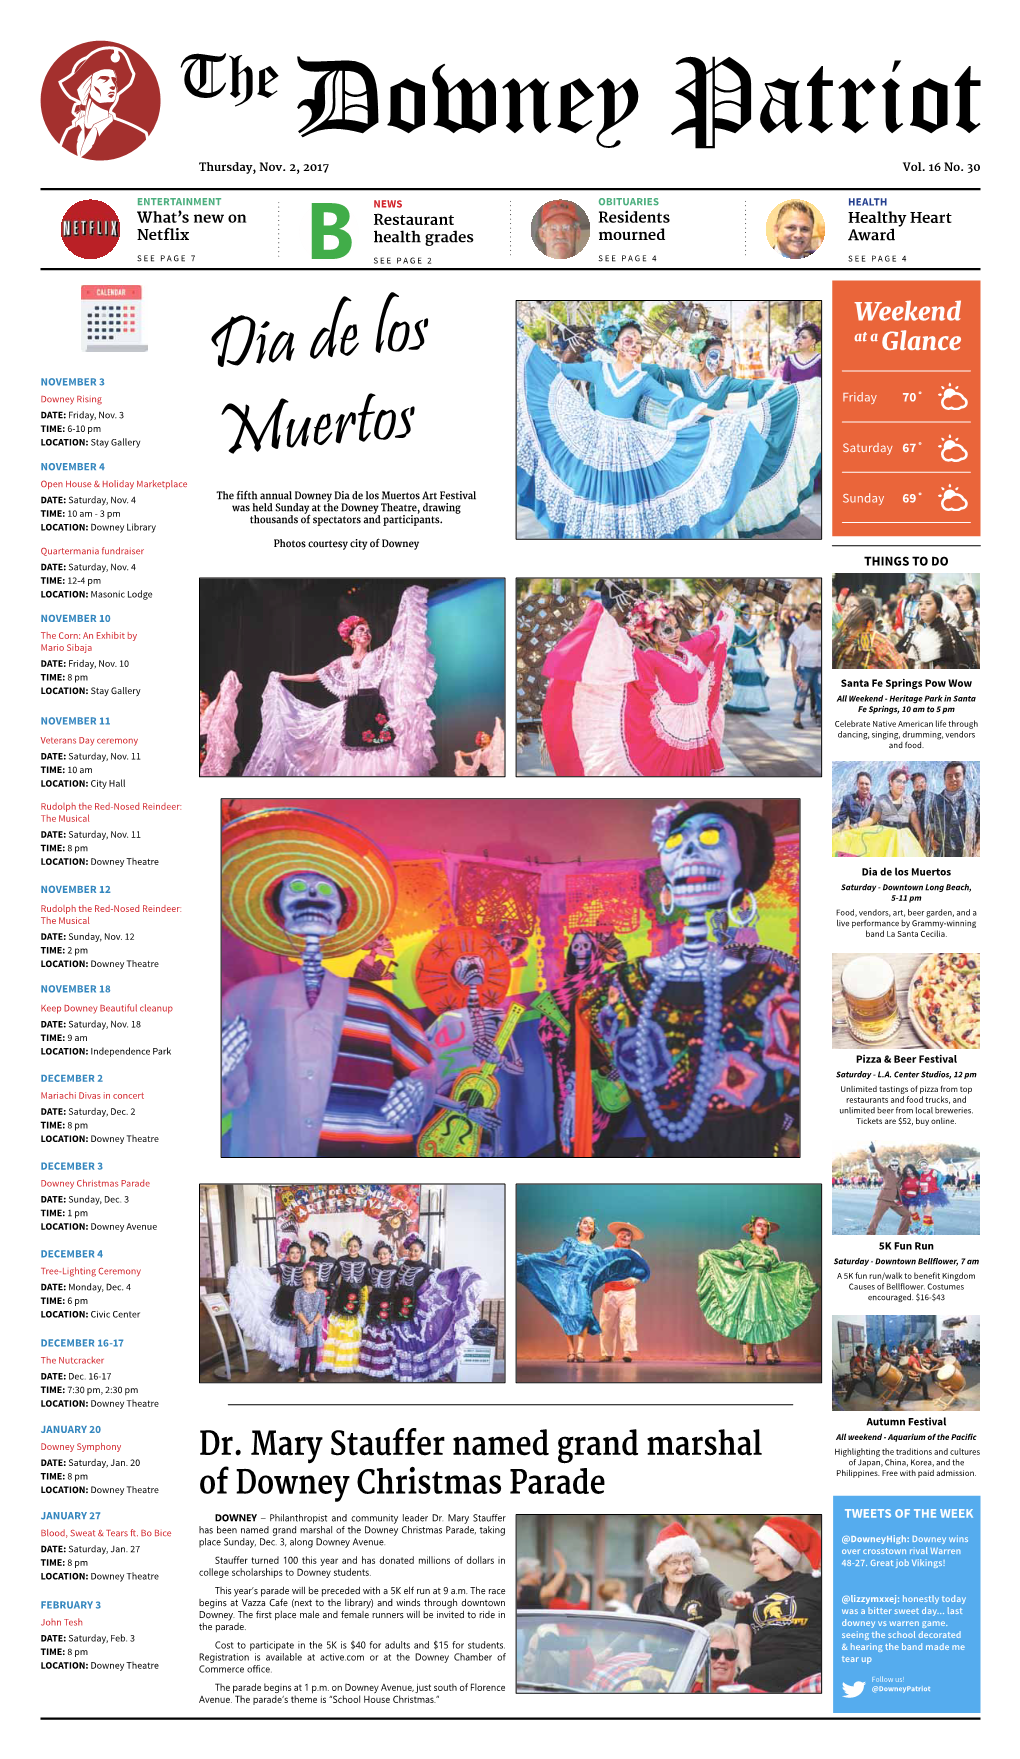 Dia De Los Muertos Art Festival Sunday 69˚ Was Held Sunday at the Downey Theatre, Drawing 70⁰ TIME: 10 Am - 3 Pm Thousands of Spectators and Participants